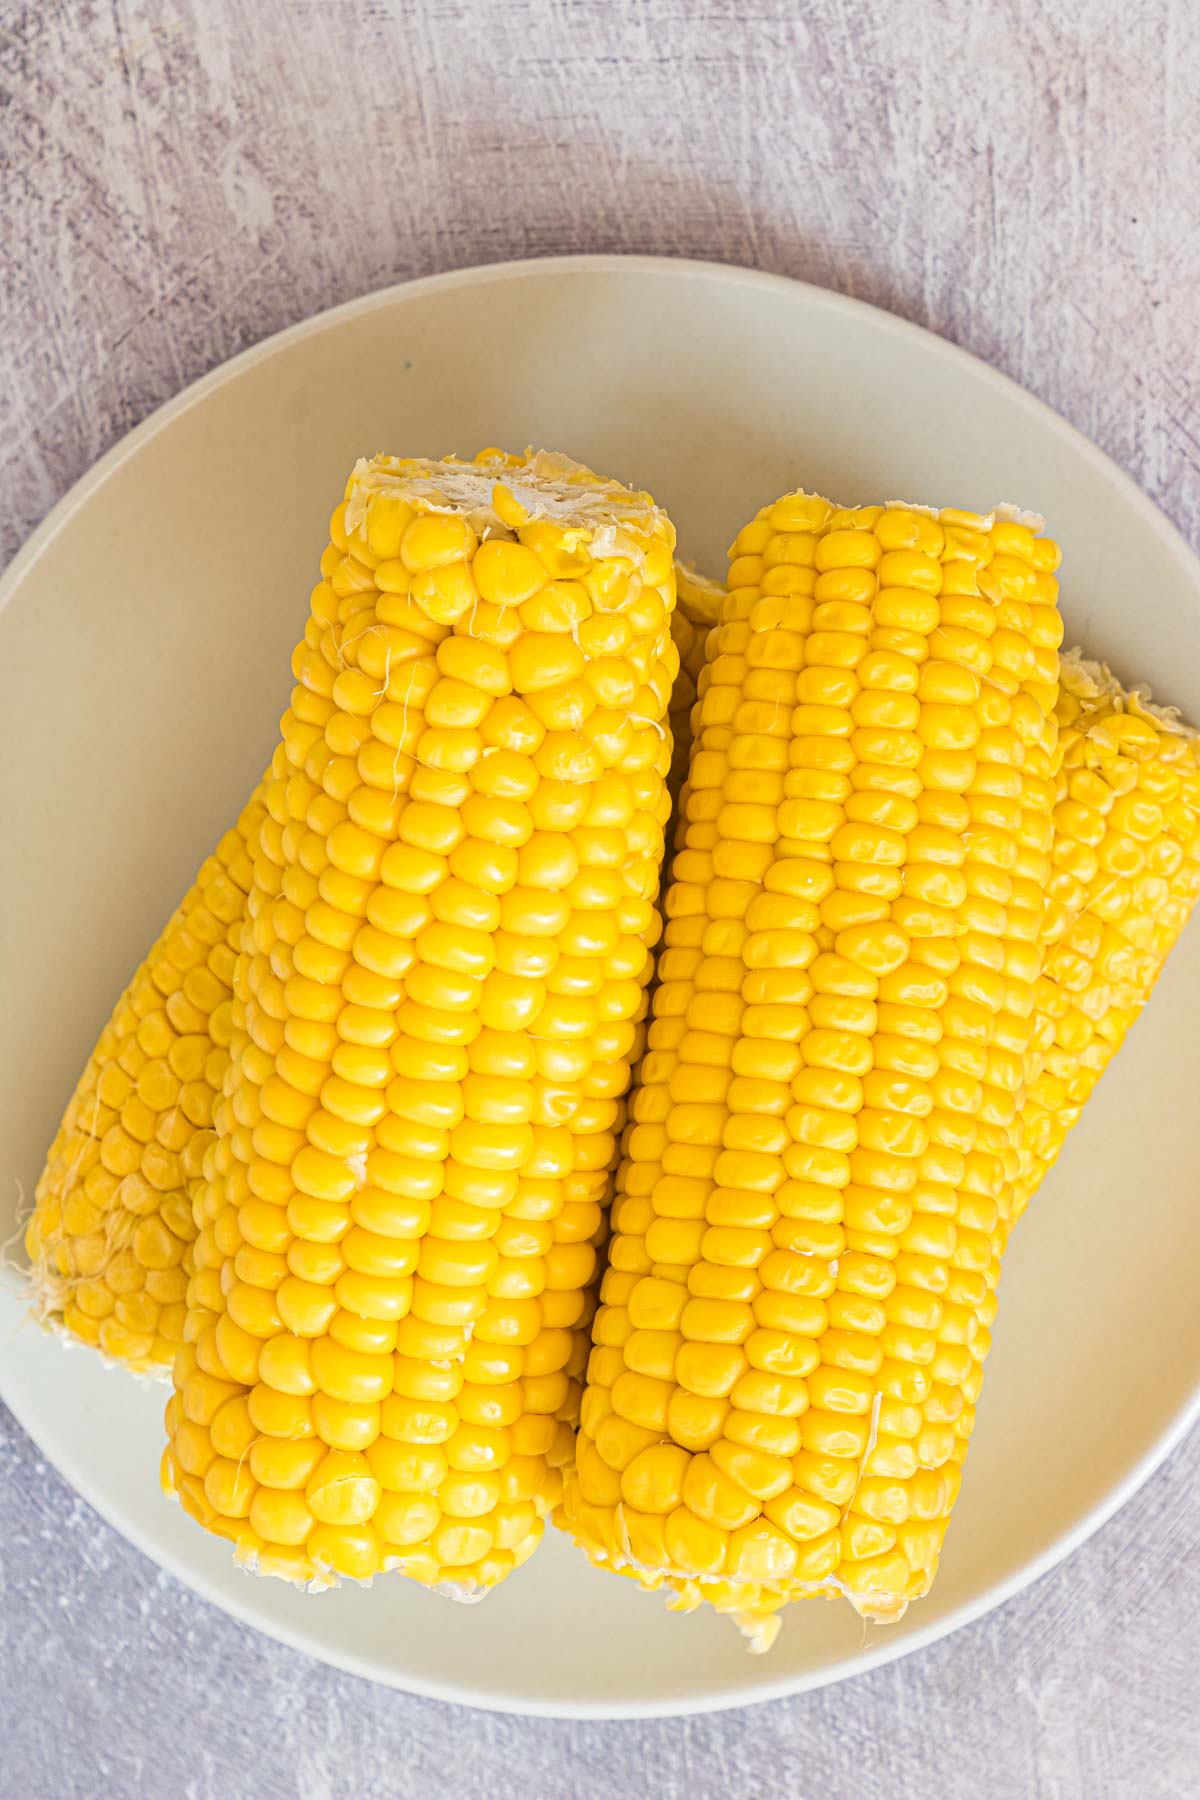 Top to bottom view of the complete recipe of how to heat corn on the cob